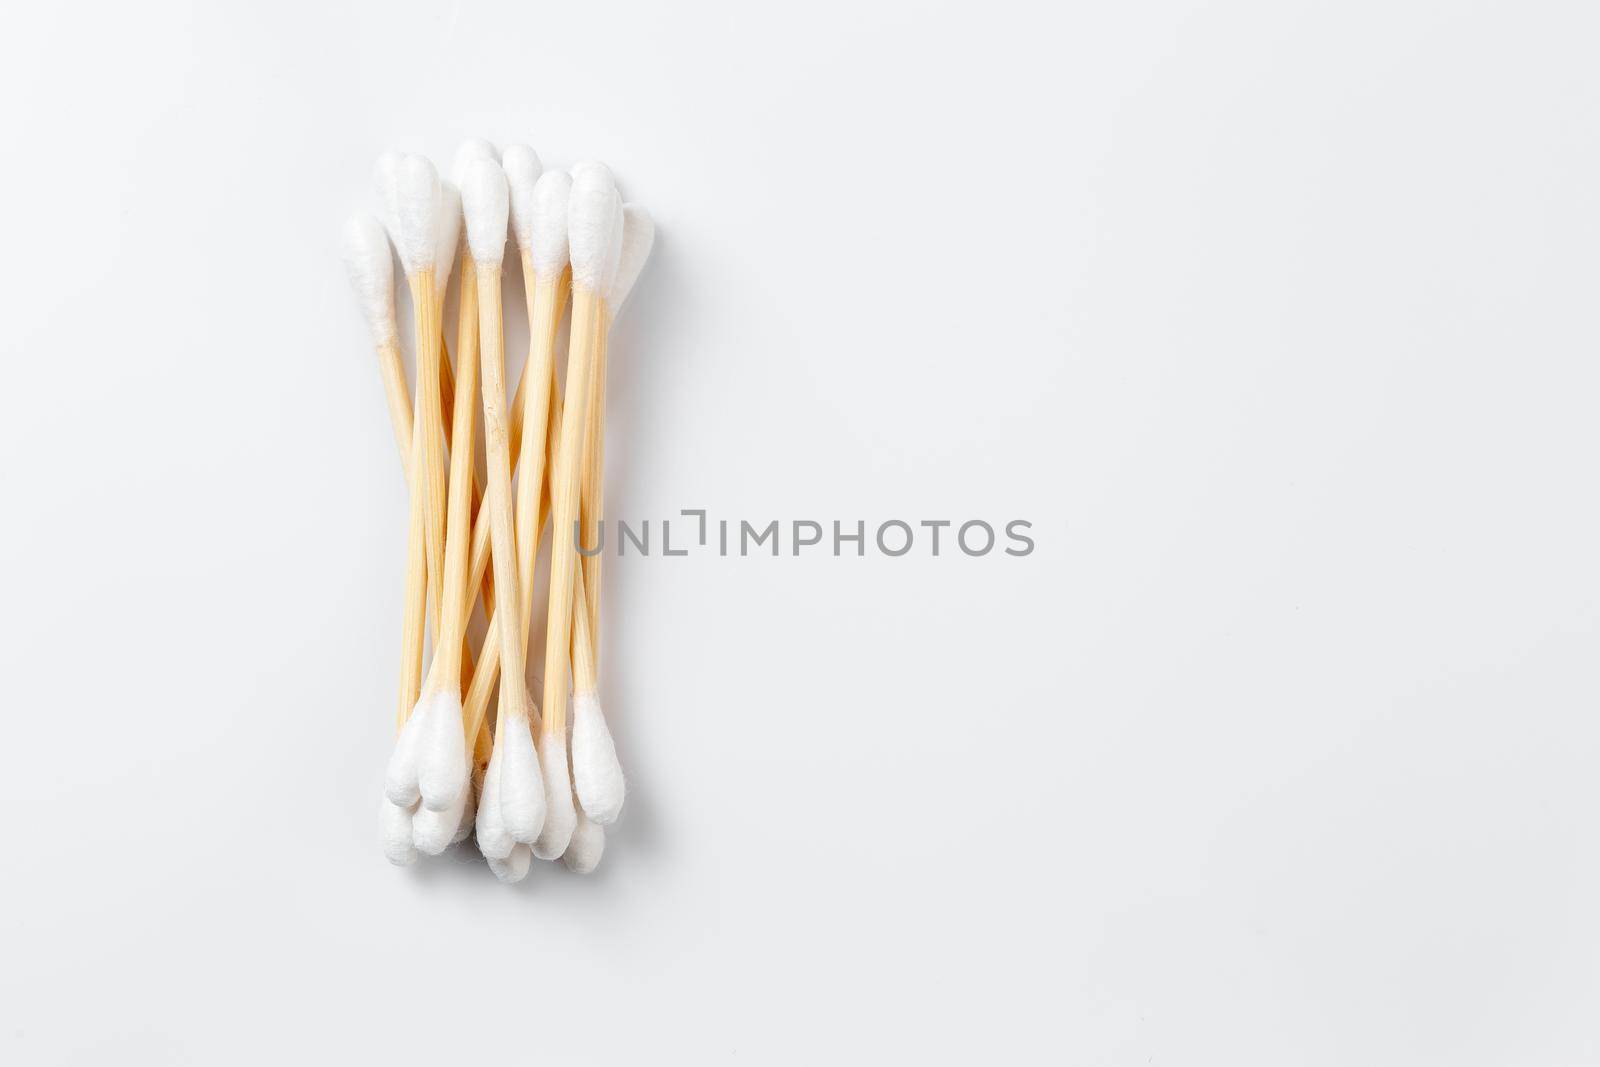 Bamboo cotton ear swabs on white background with copy space. Zero waste hygienic accessory product concept.